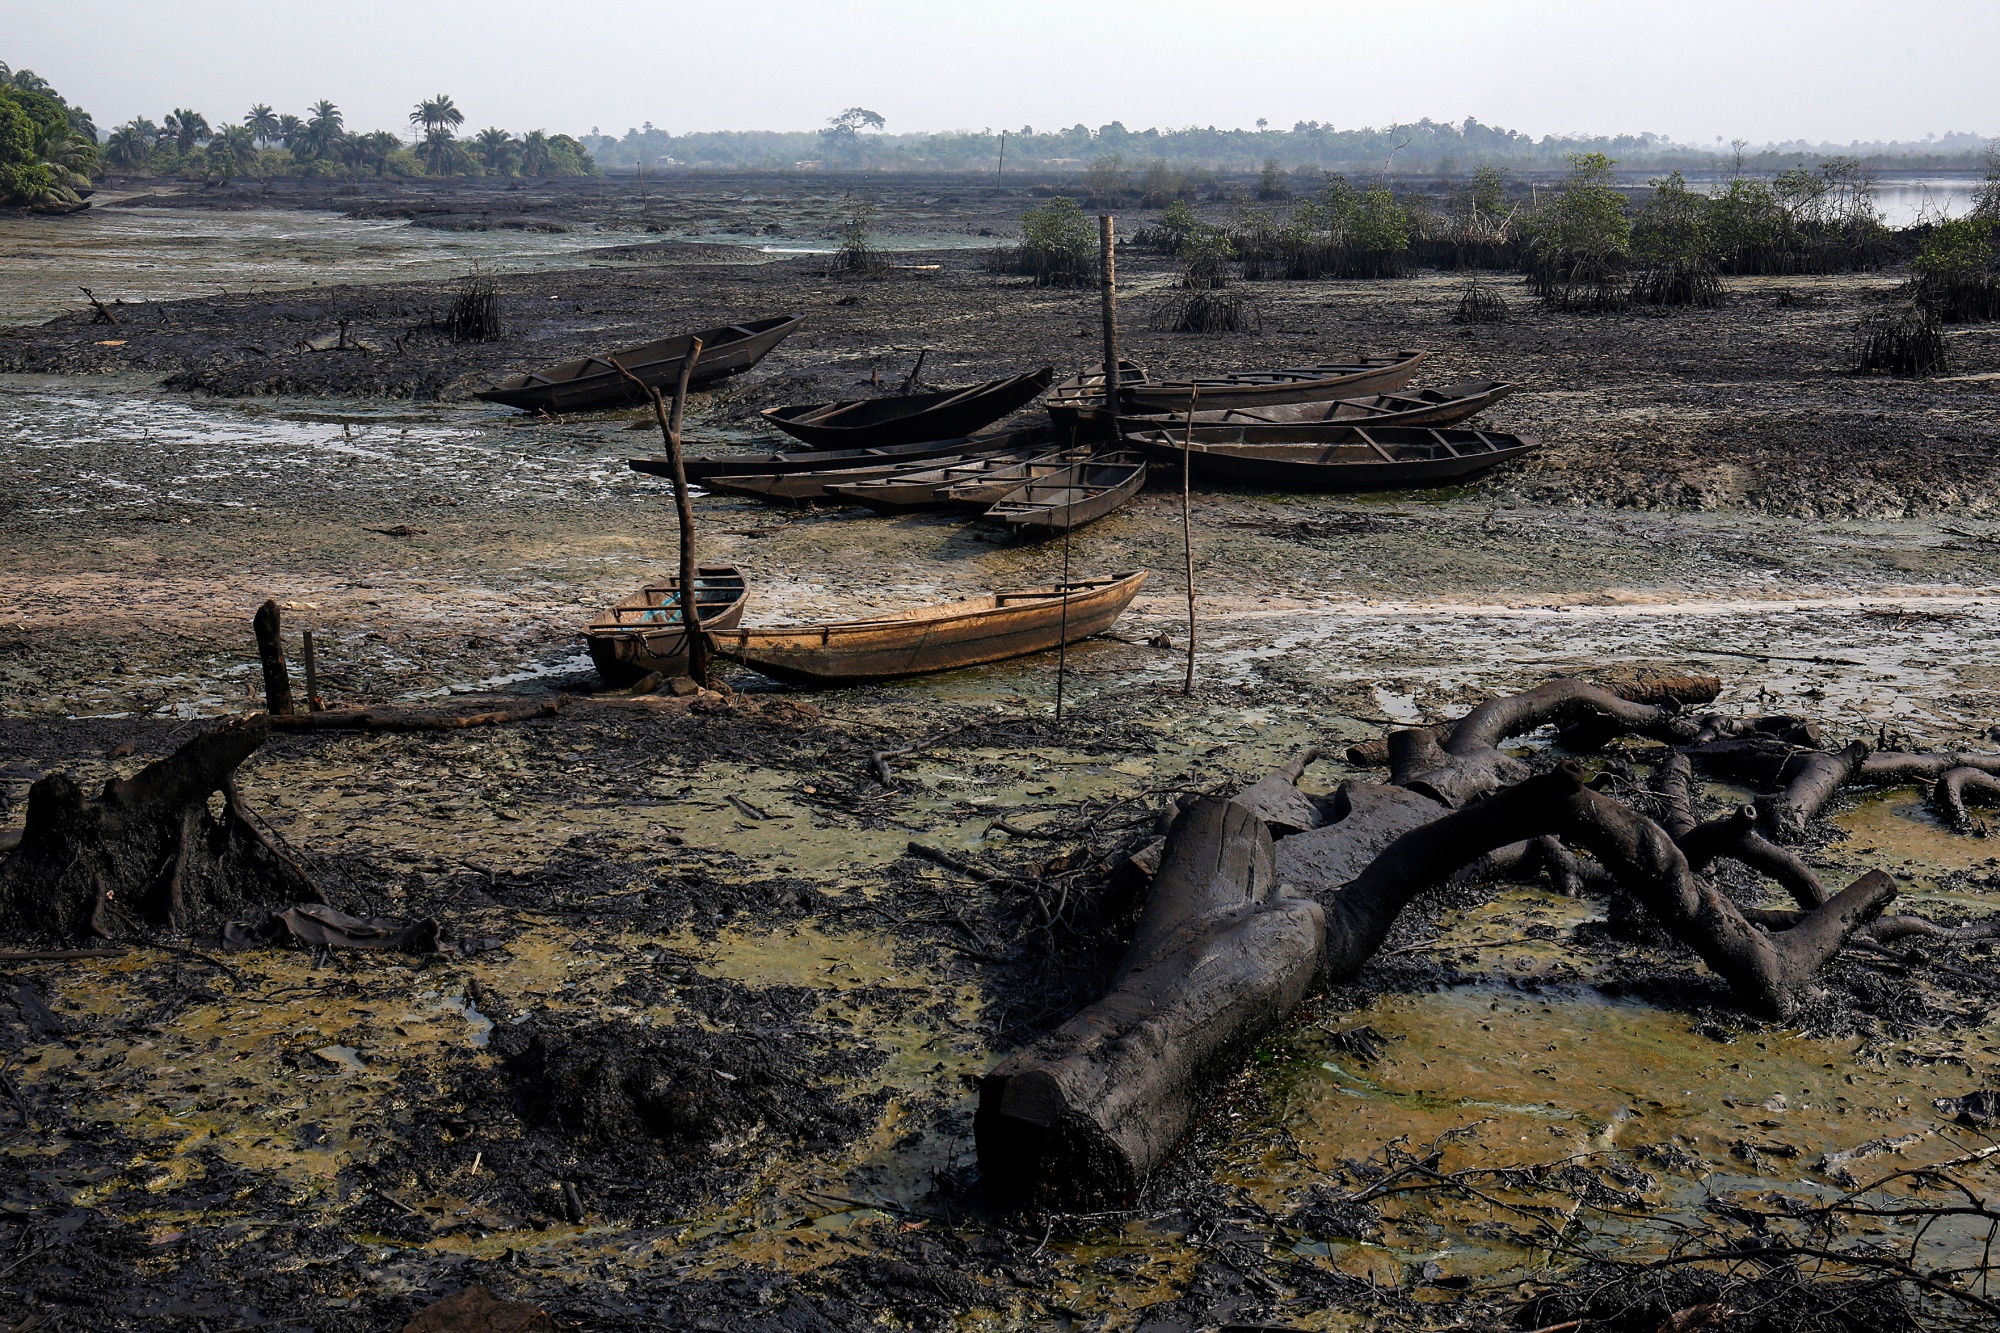 Crude oil pollution covers the shoreline of an estuary in B-Dere, Ogoniland, Nigeria.